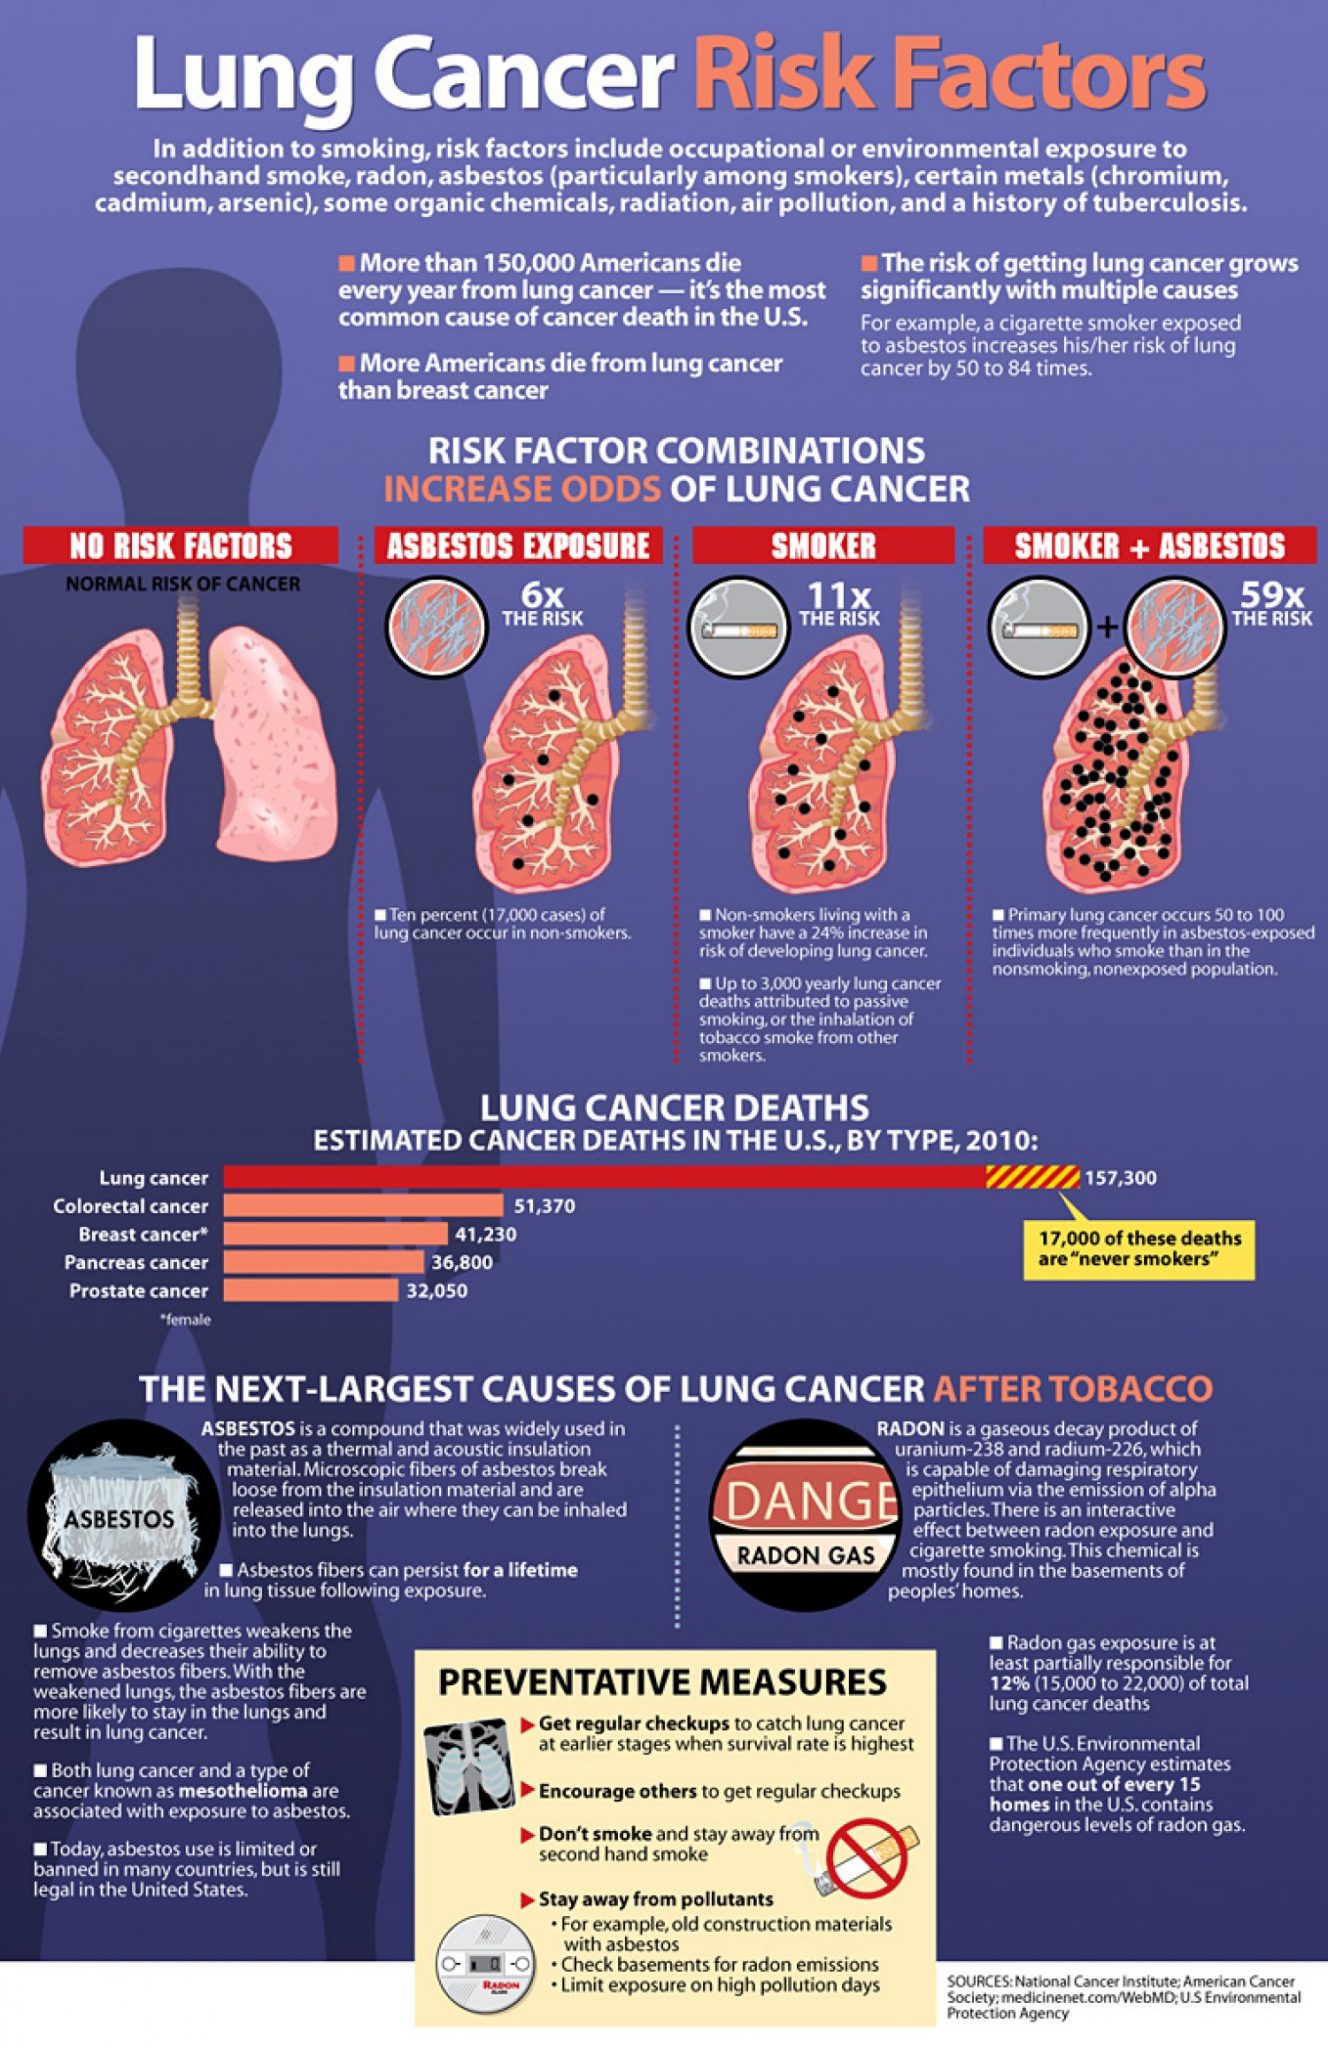 how long does it take to get lung cancer from asbestos